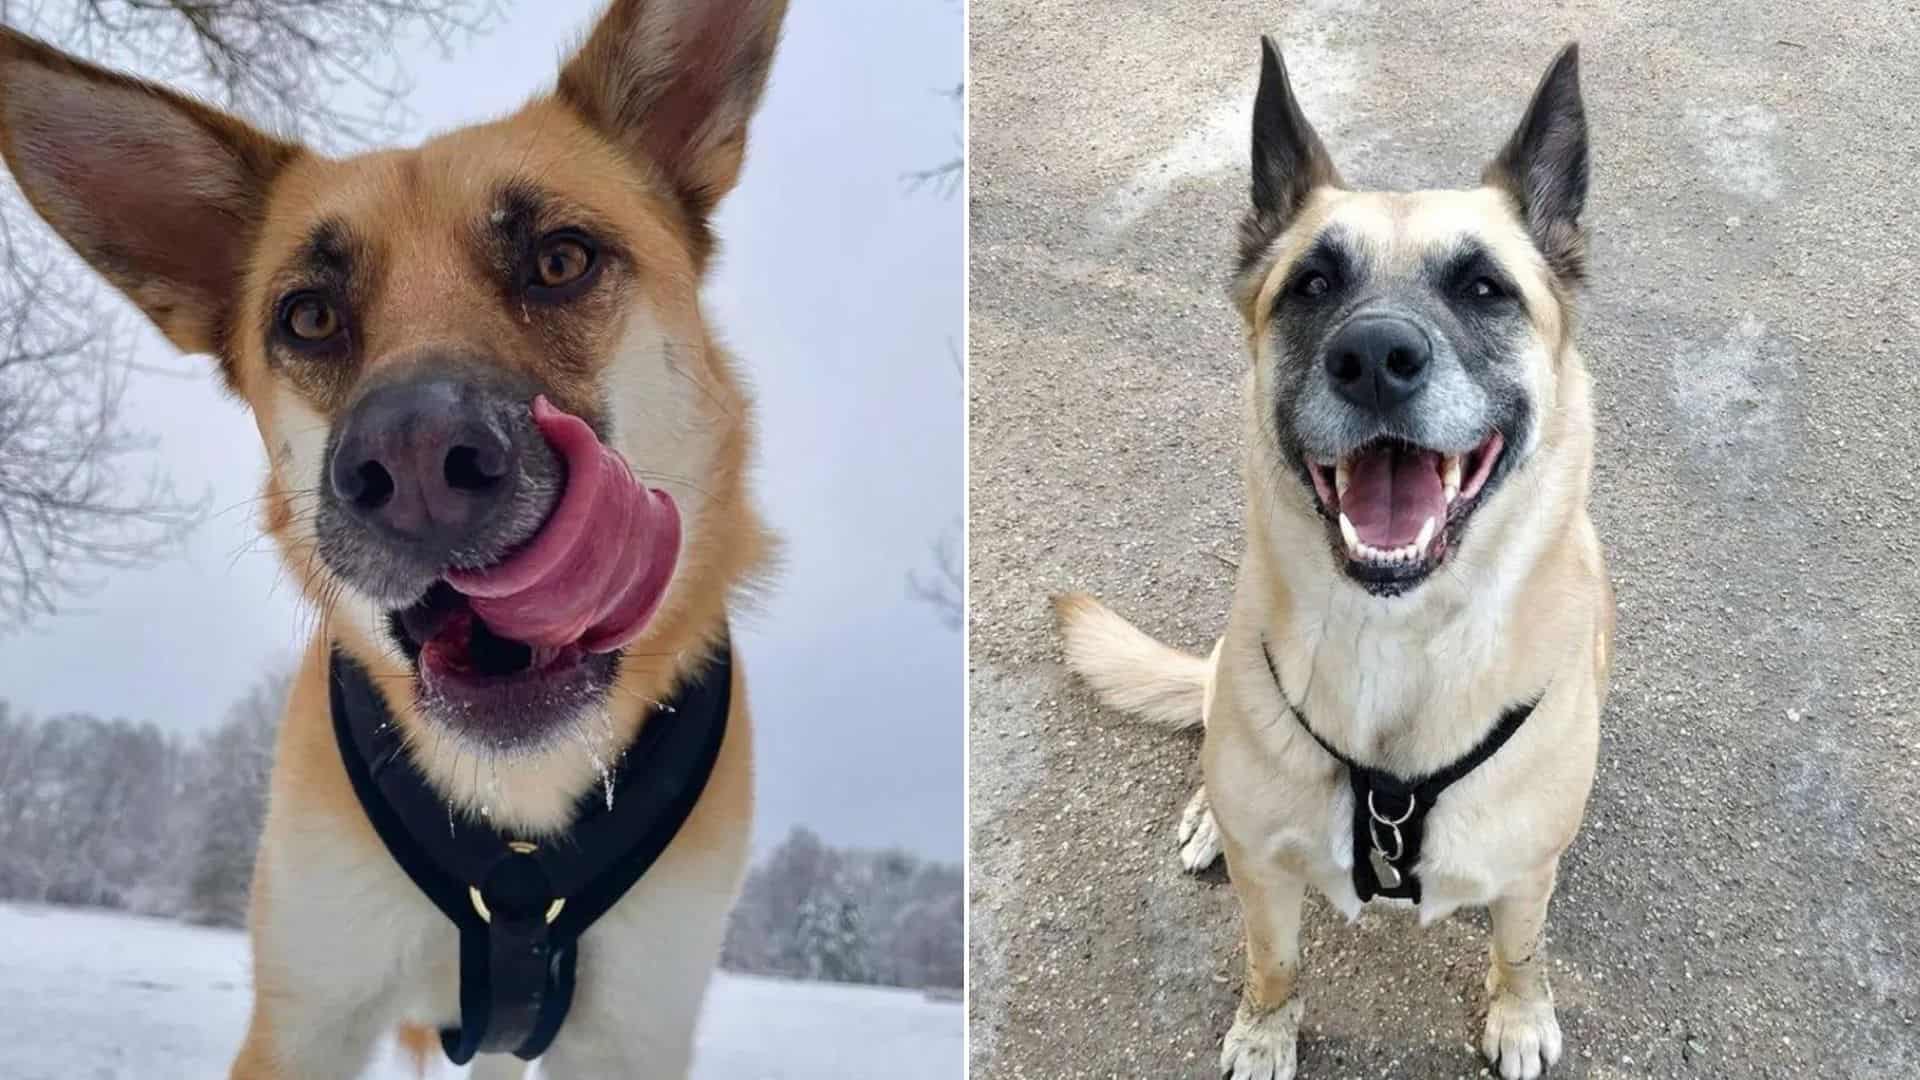 What Is A Shepkita And Why Are These Dogs So Desirable?